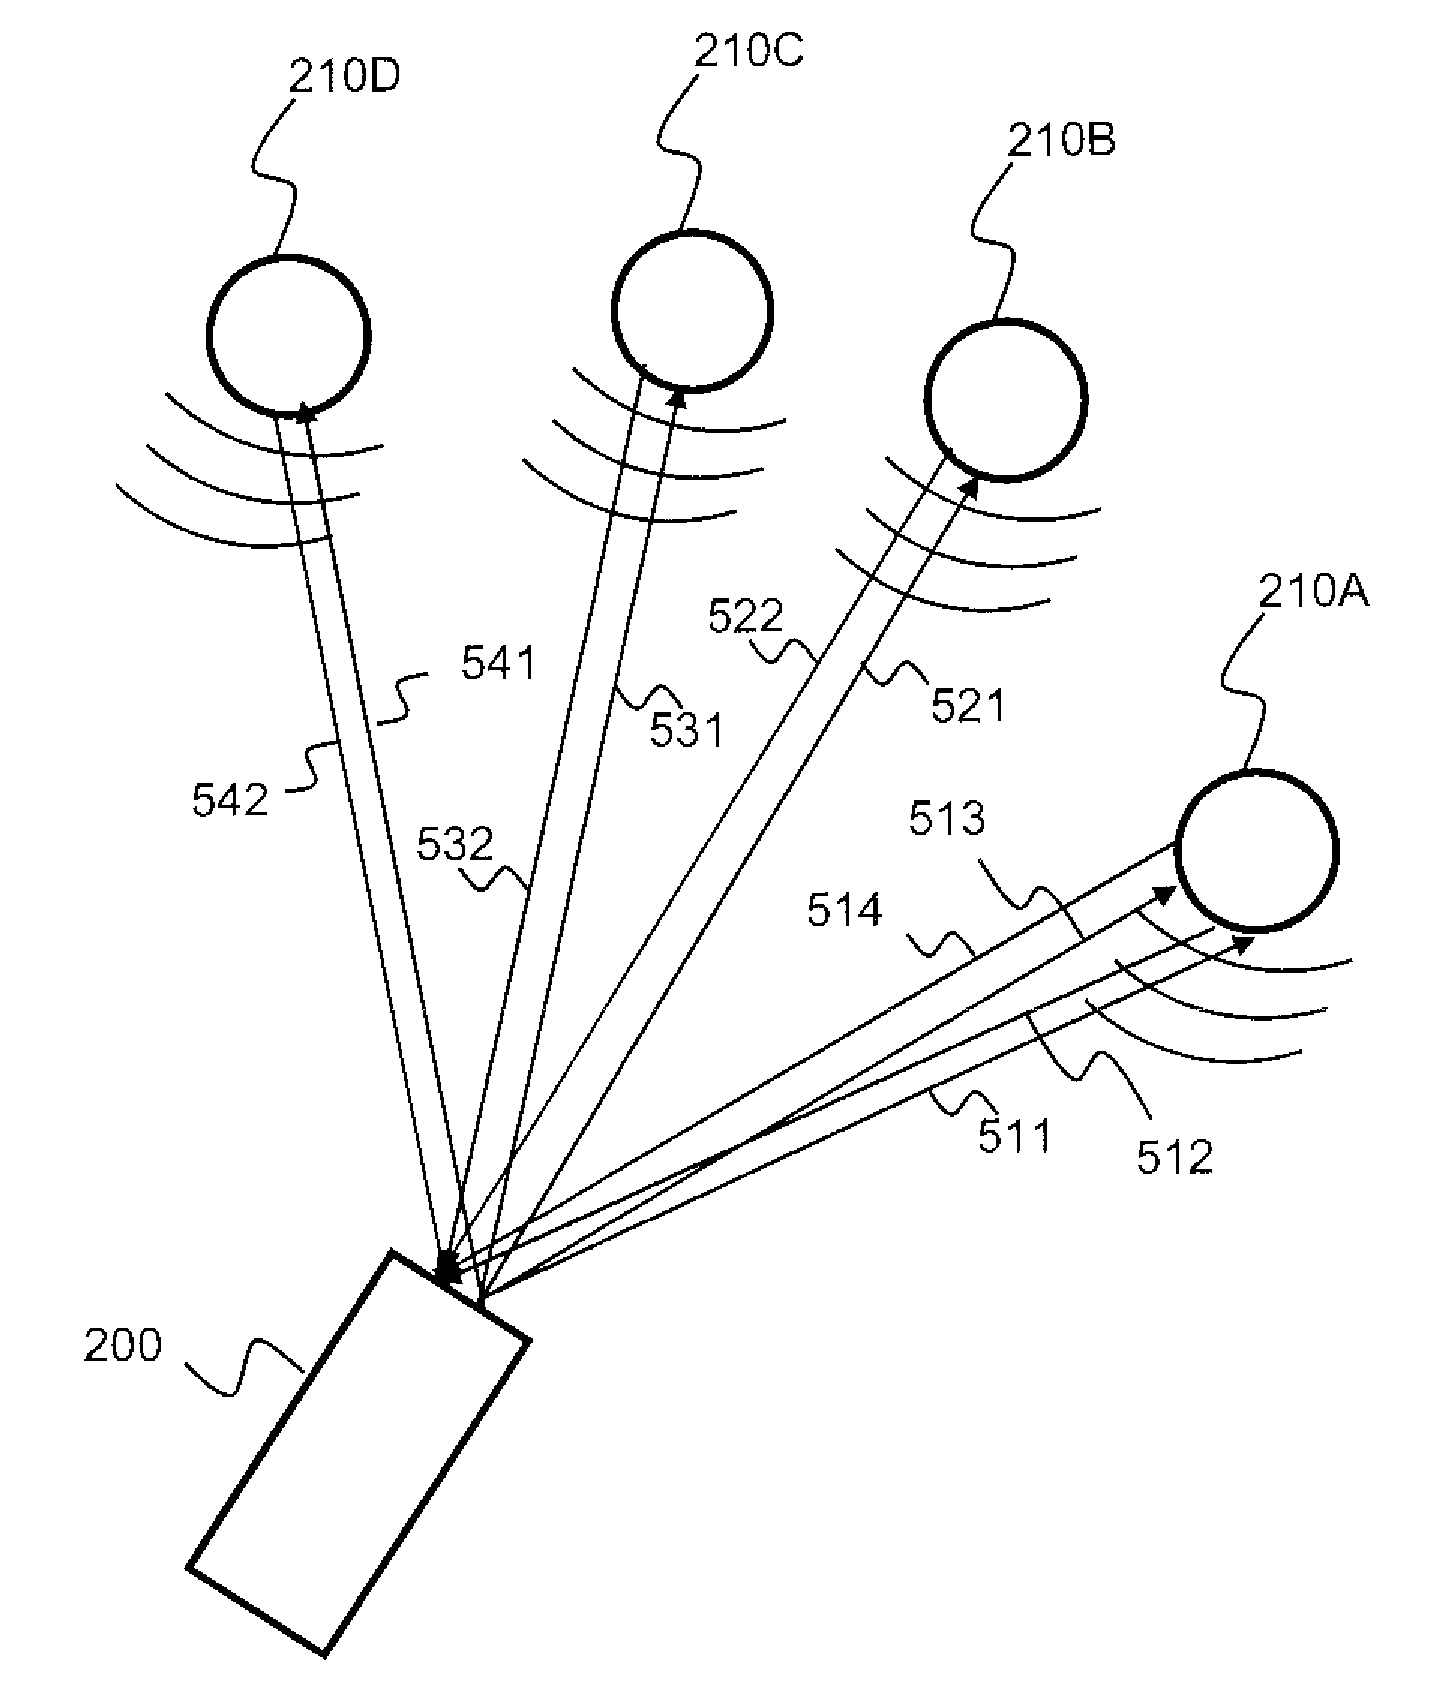 Sound sources separation and monitoring using directional coherent electromagnetic waves